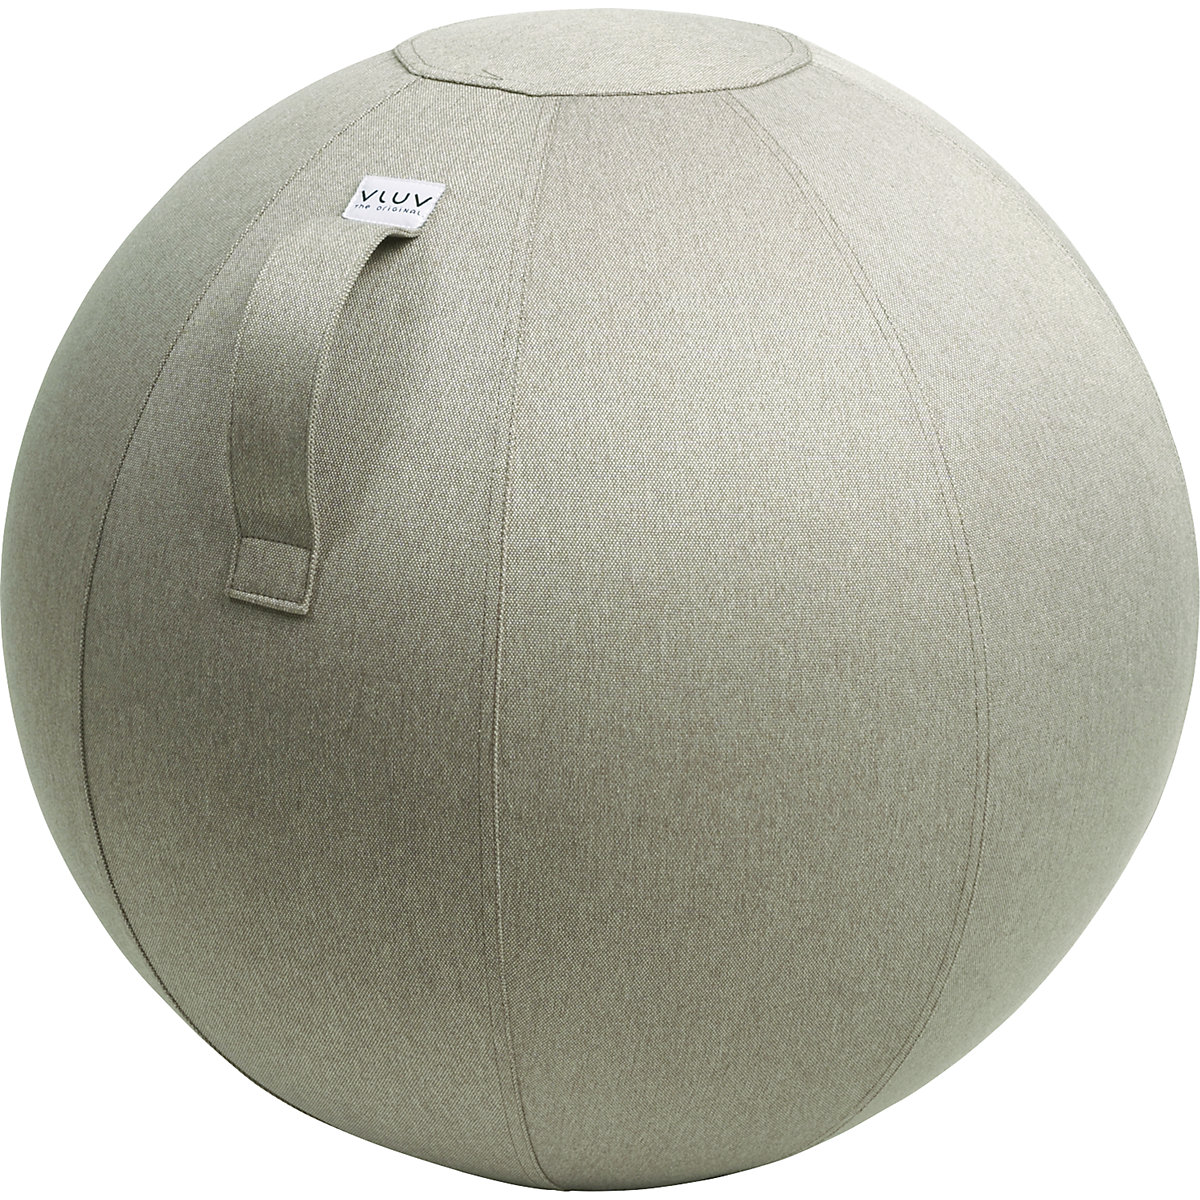 LEIV Swiss ball – VLUV, fabric cover with the appearance of canvas, 600 – 650 mm, stone grey